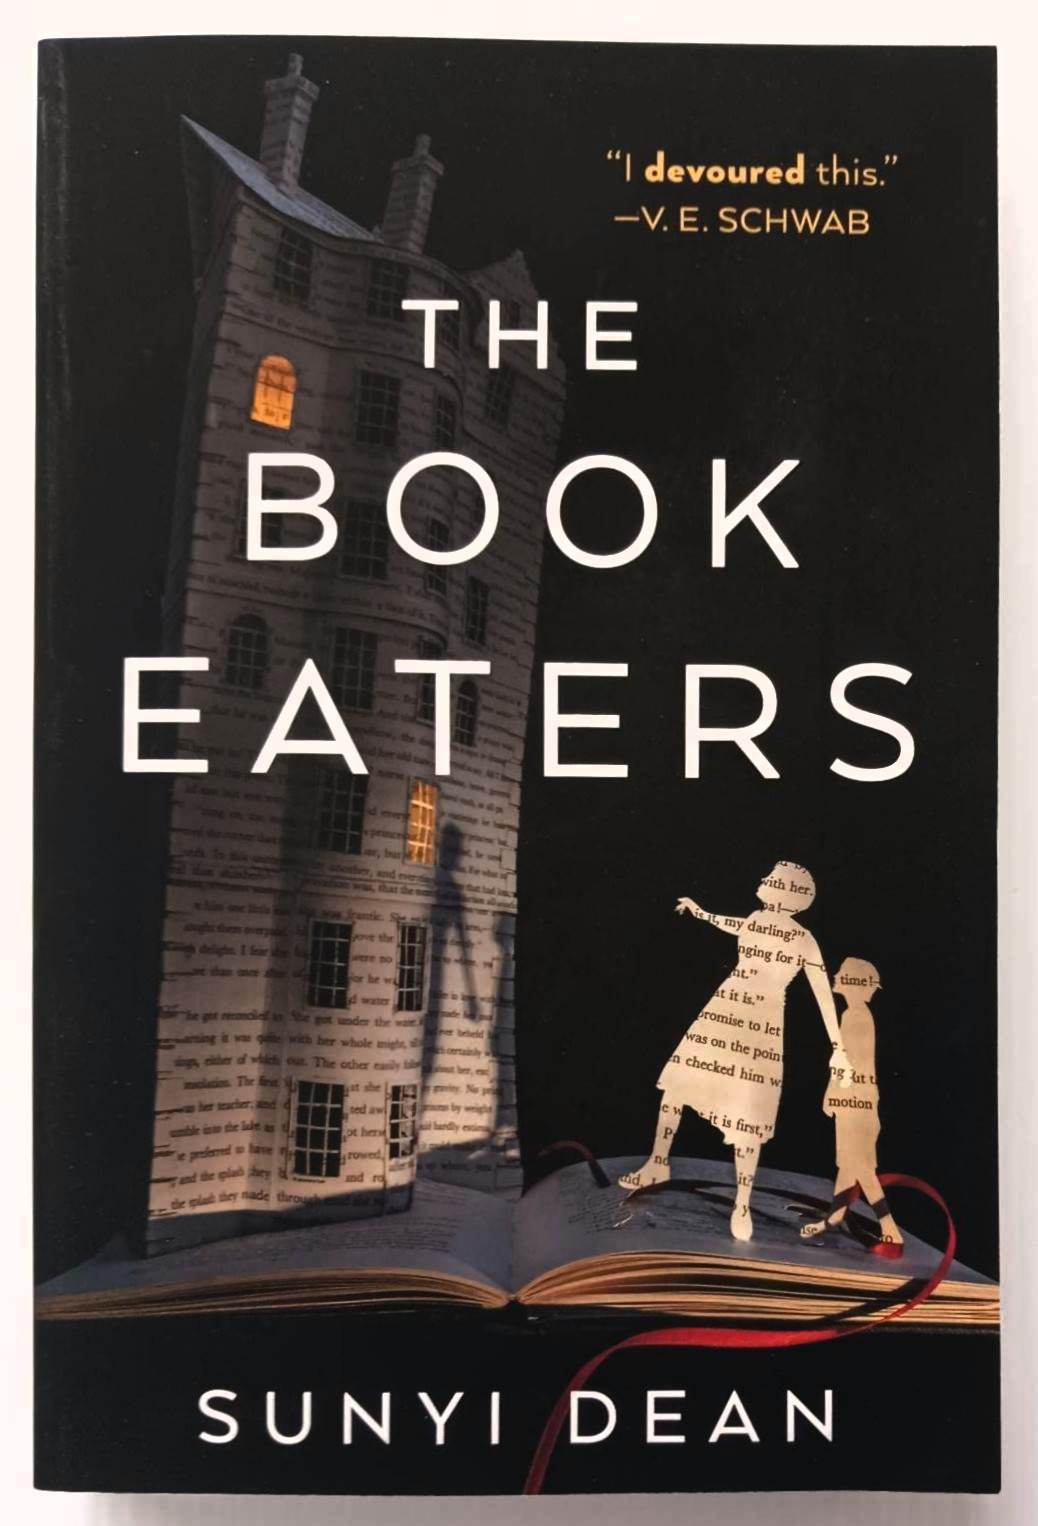 THE BOOK EATERS - Sunyi Dean